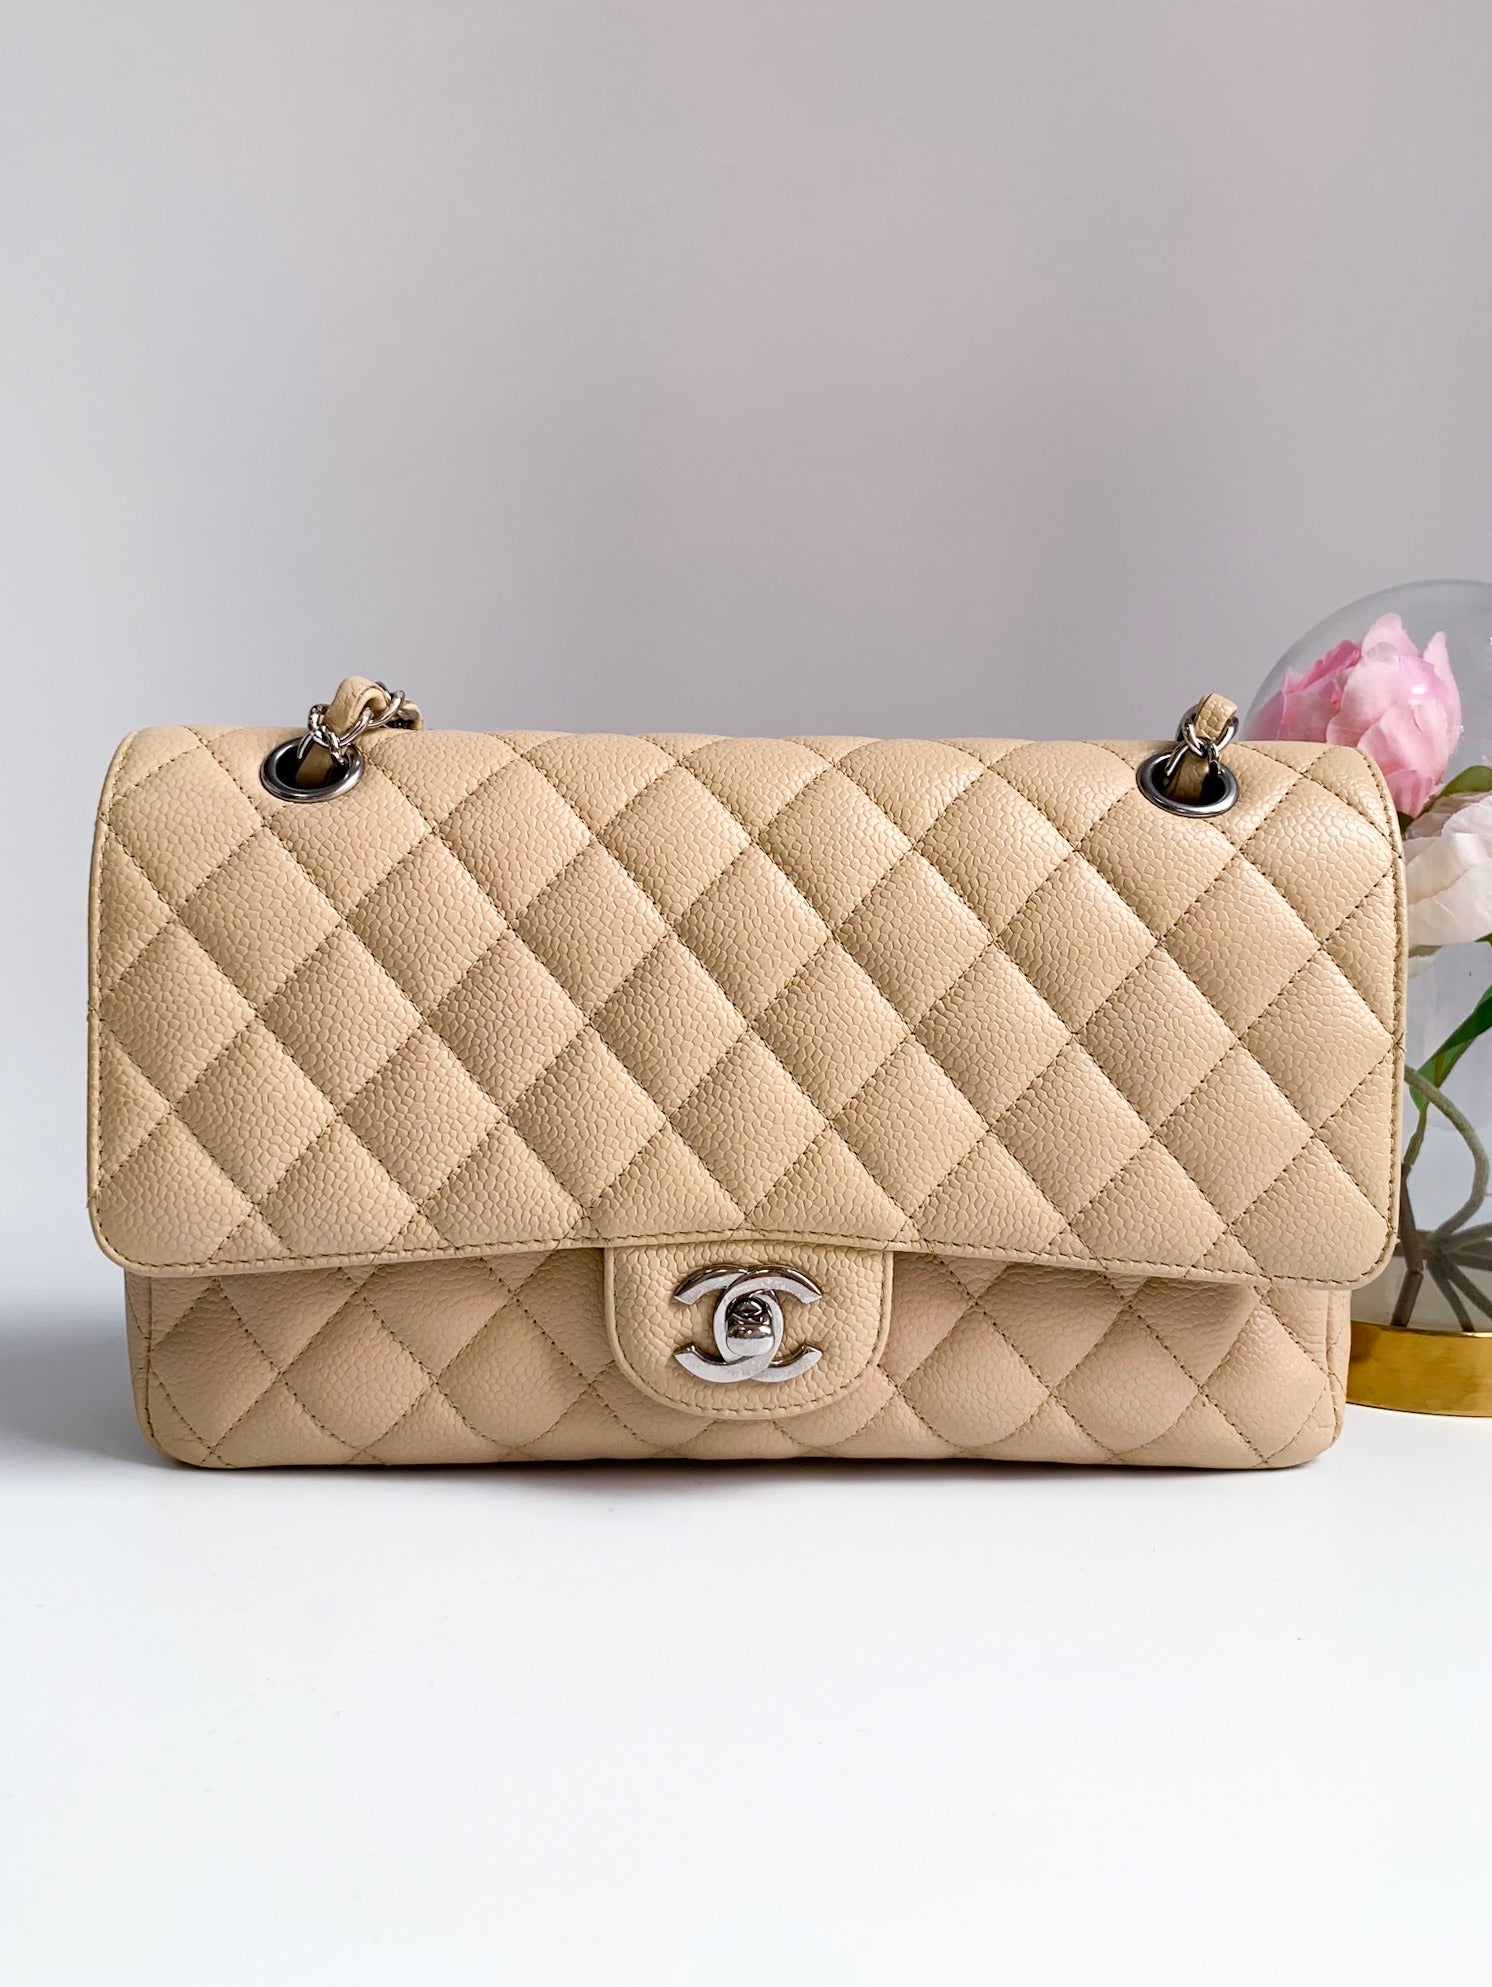 CHANEL BEIGE CLAIR UNBOXING 